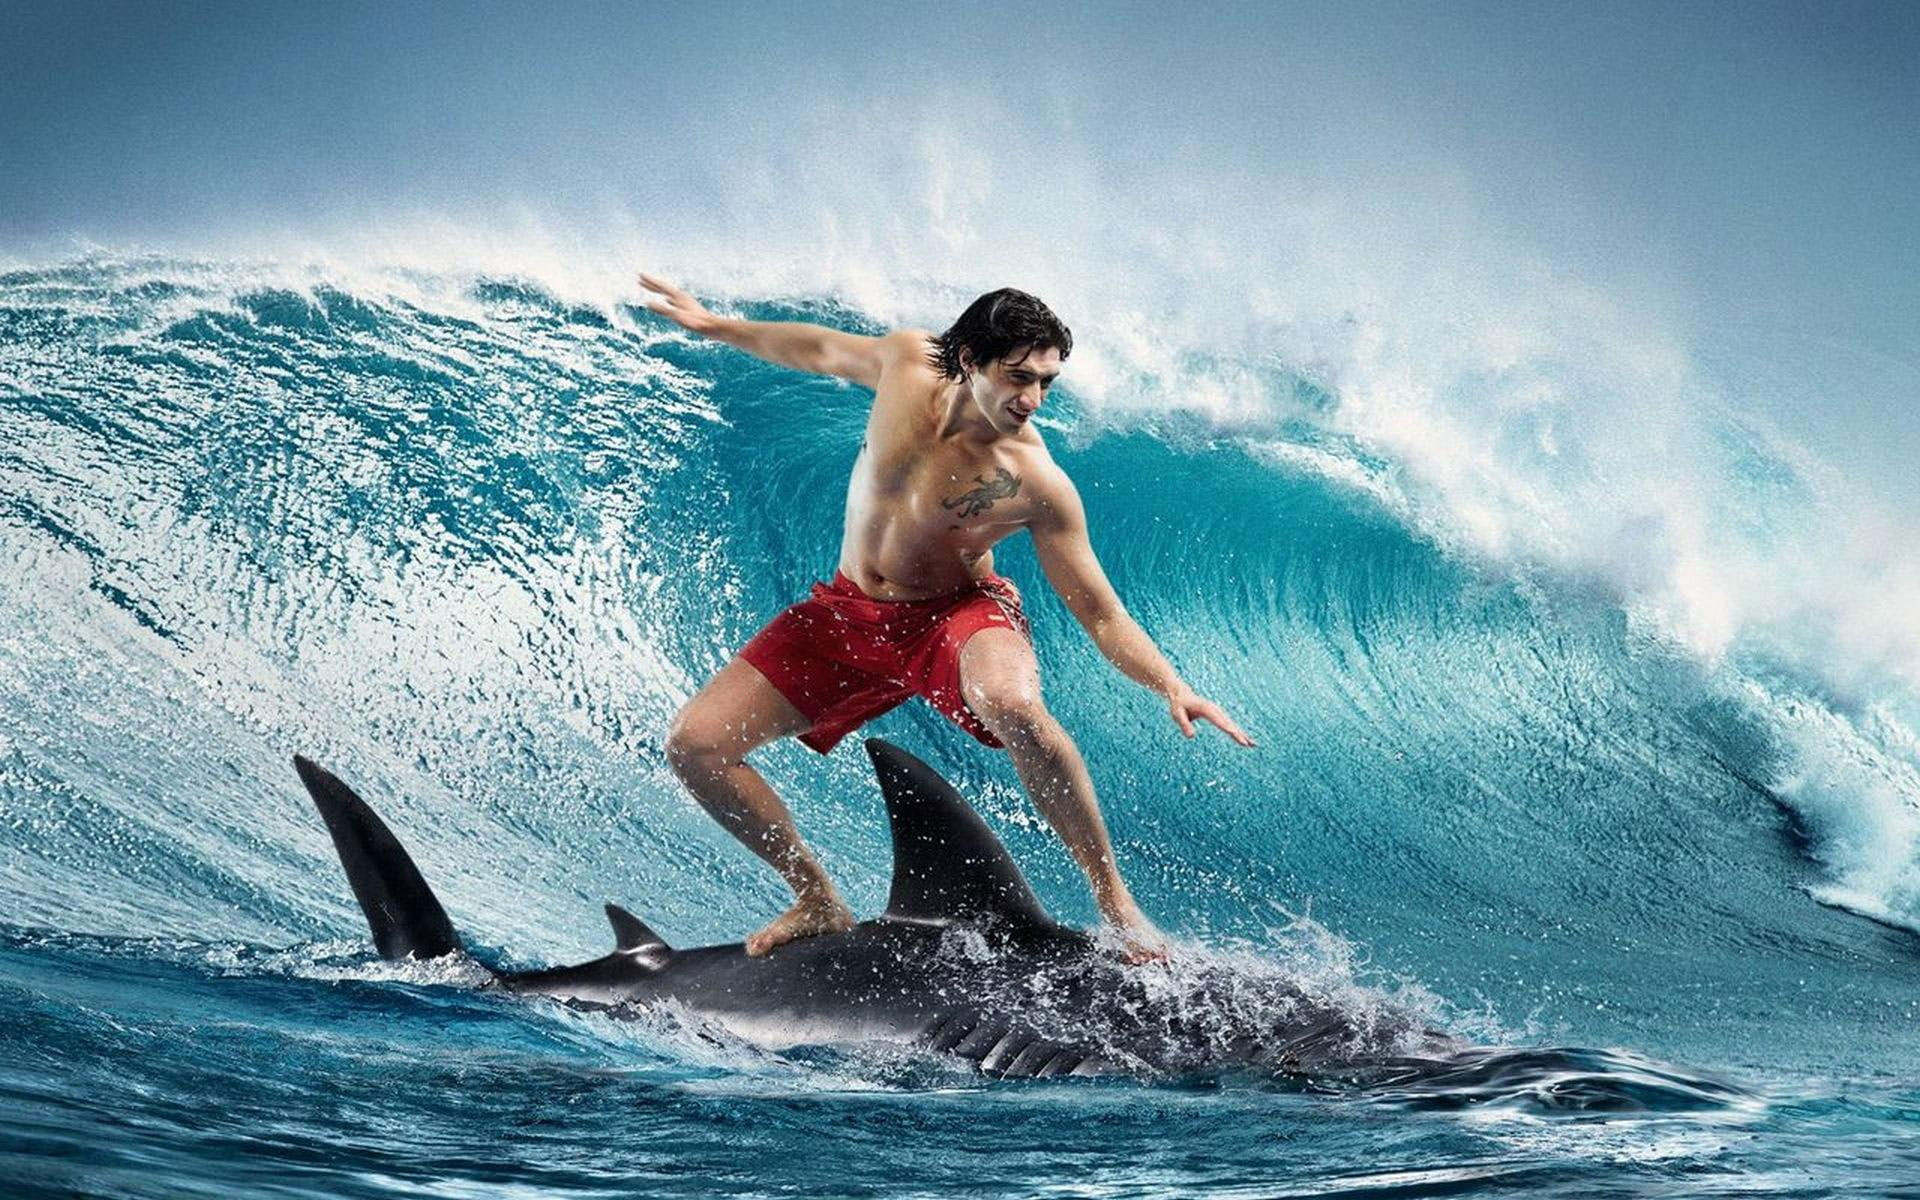 Surfing, men’s red shorts, sports, abstract, fantasy, courage